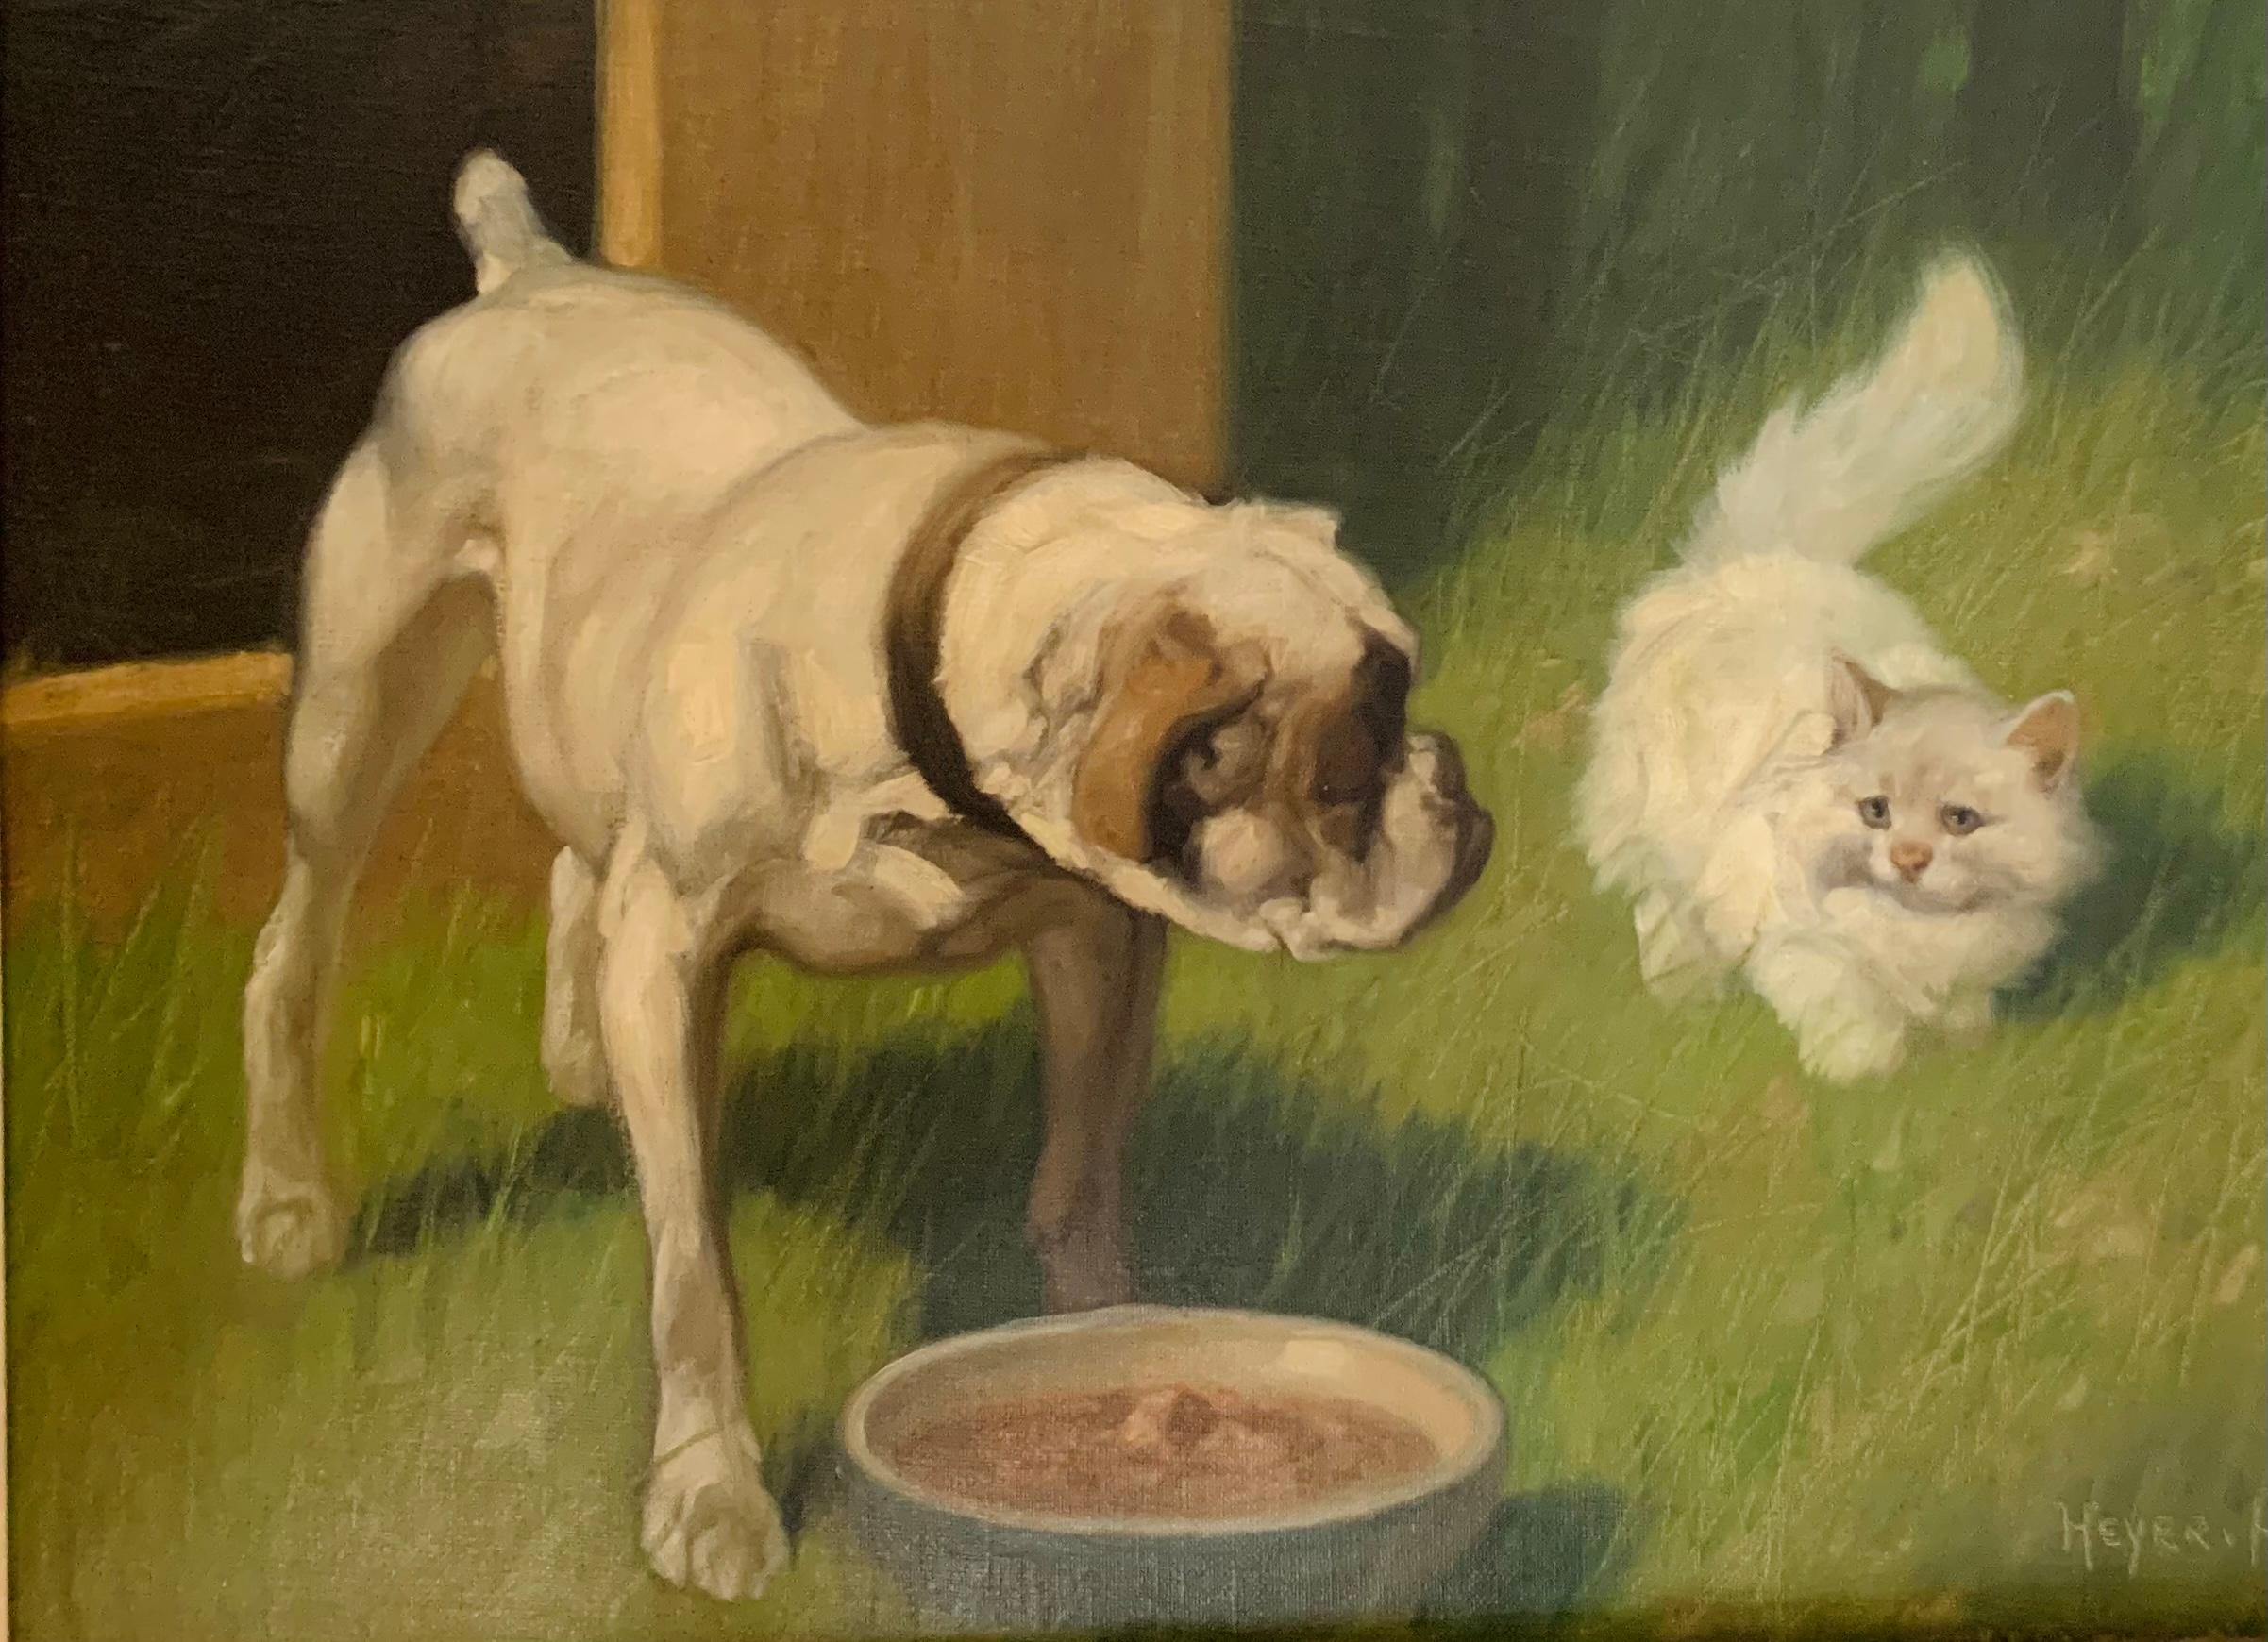 Dog Guarding Food Bowl From a Fluffy White Cat - Painting by Arthur Heyer